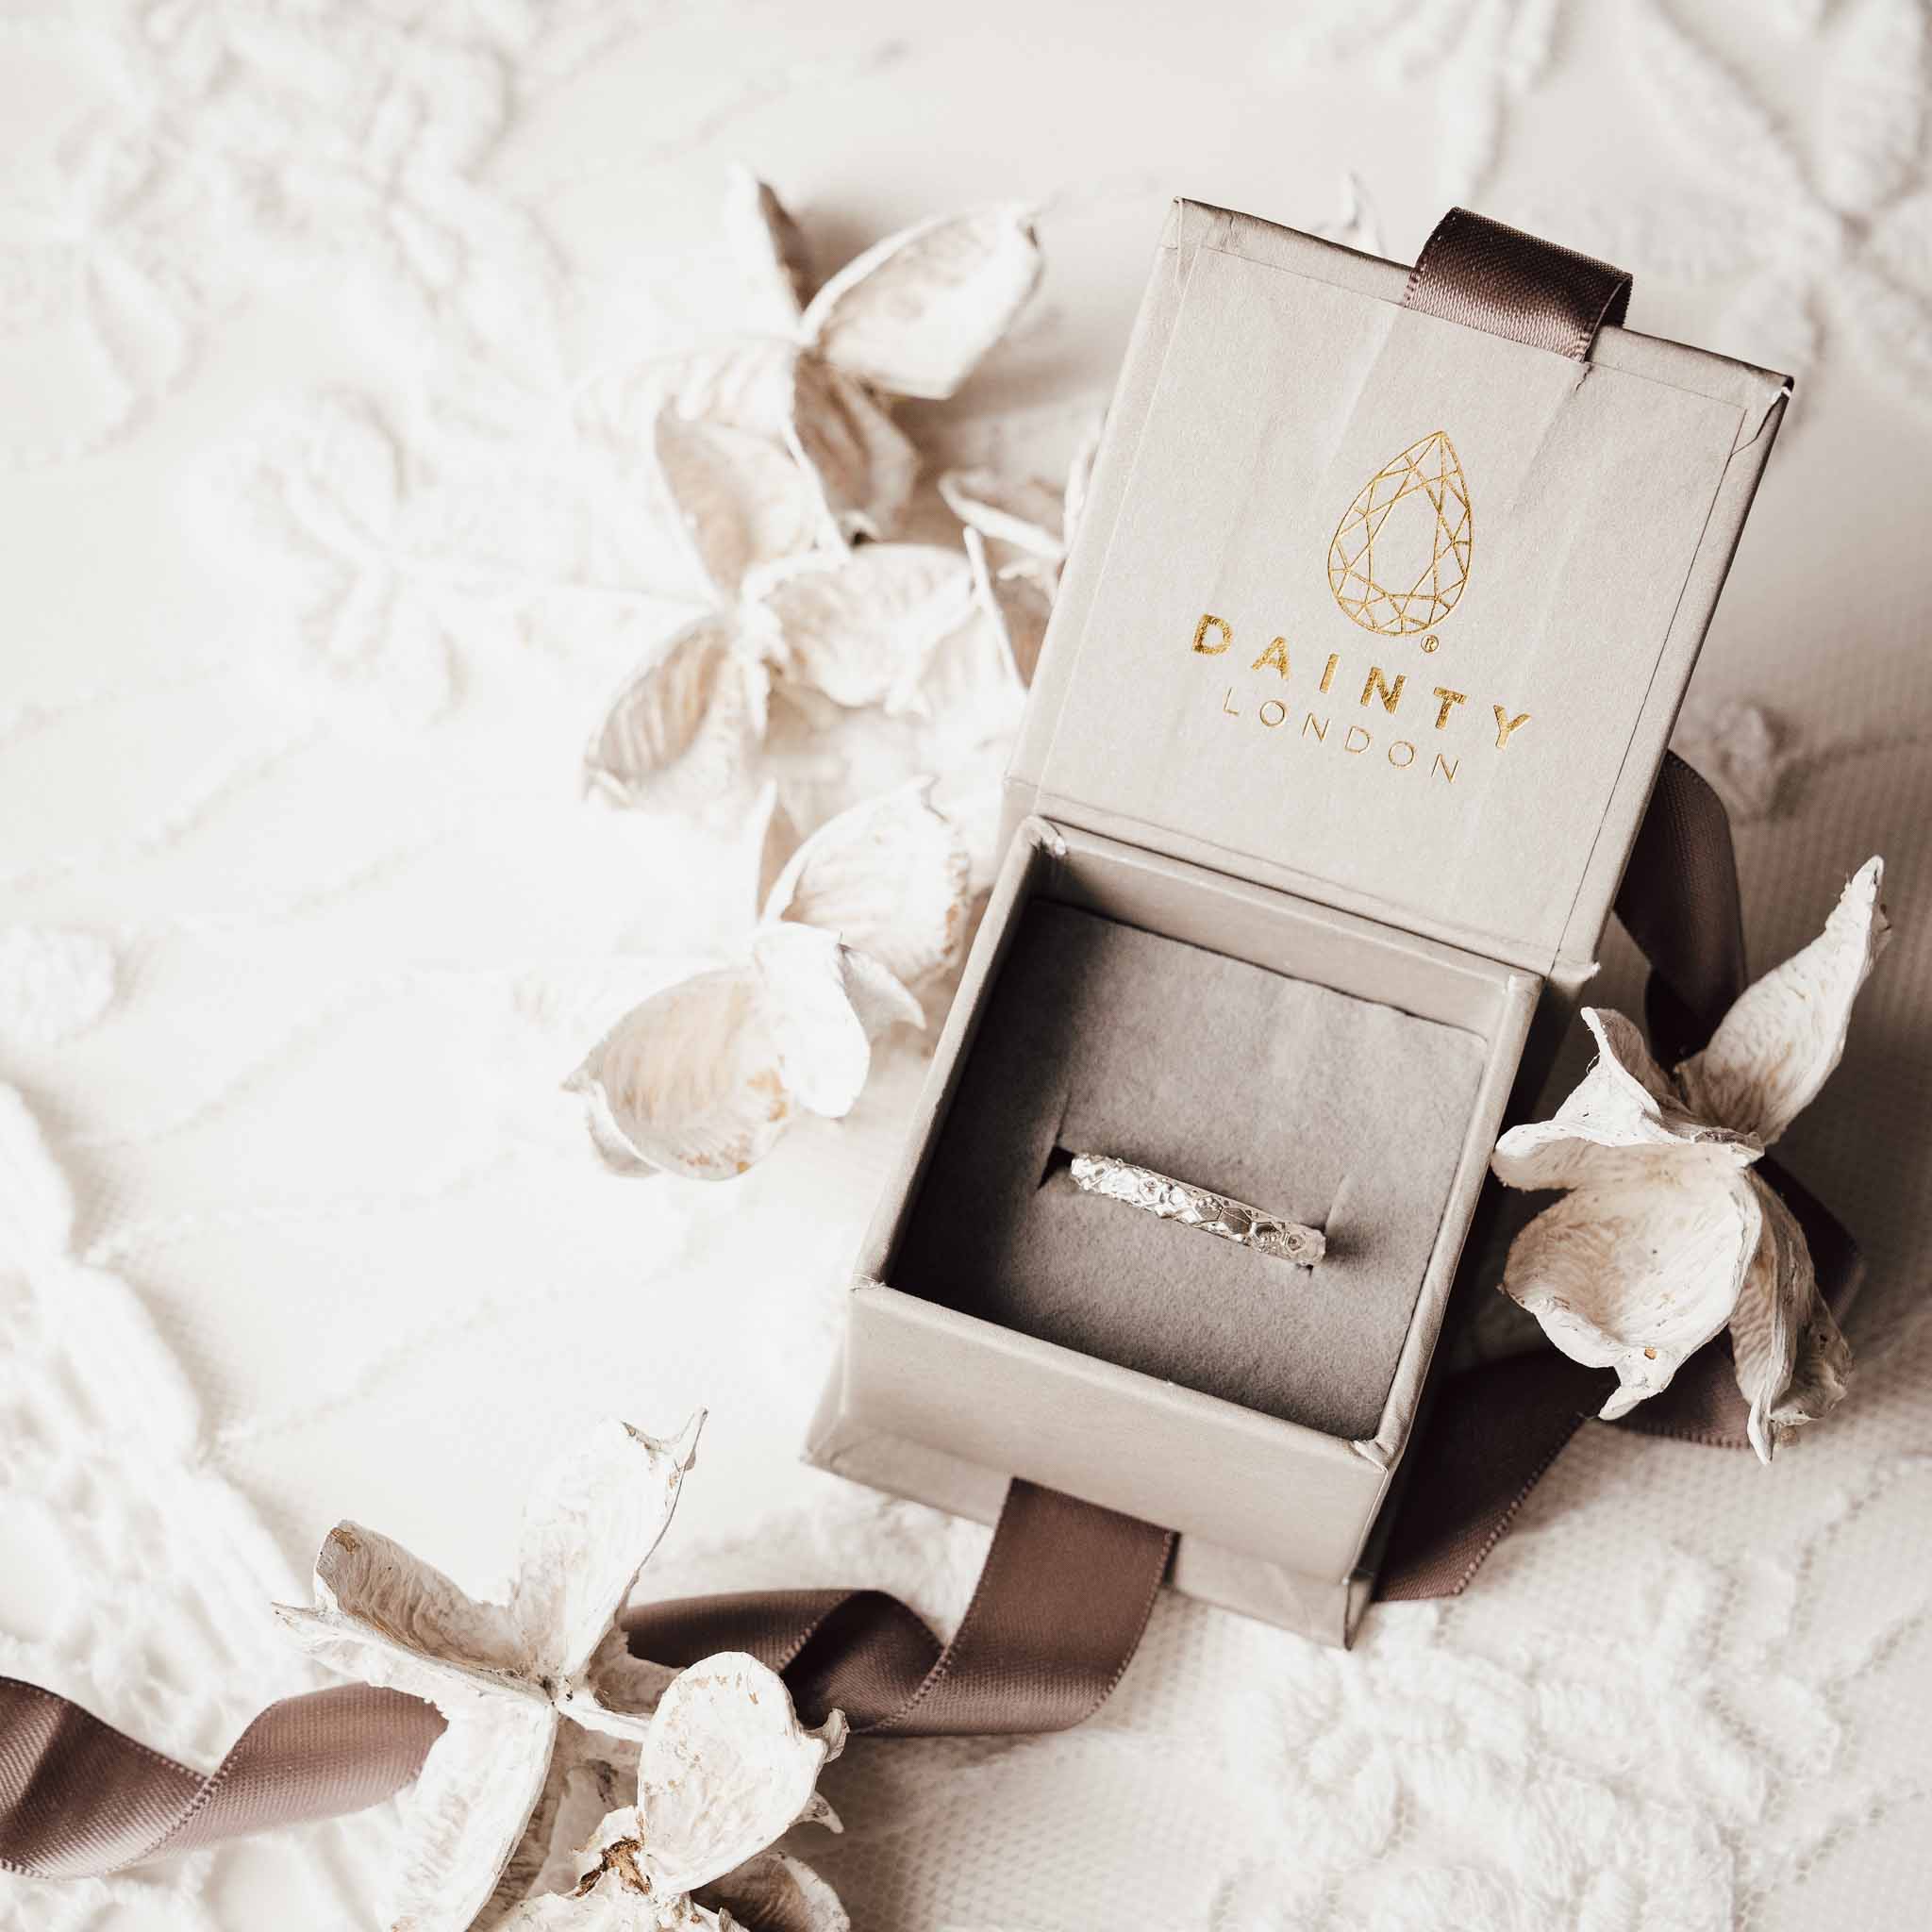 Why we use recycled sterling silver - Dainty London